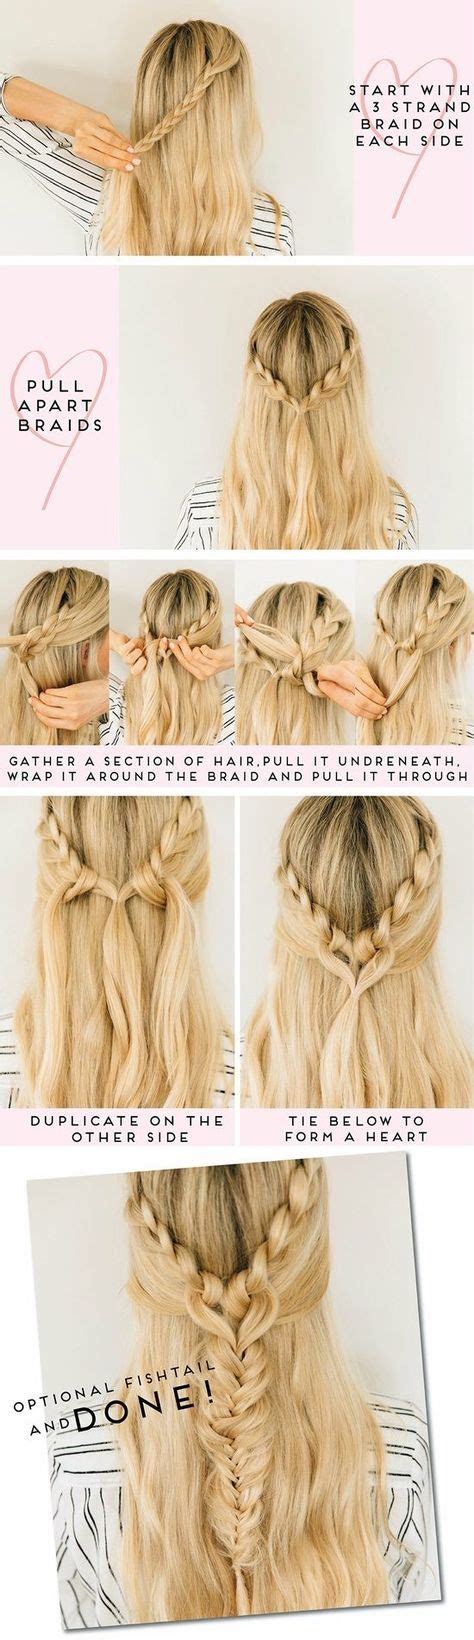 15 Easy Braid Tutorials You Have Never Tried Before